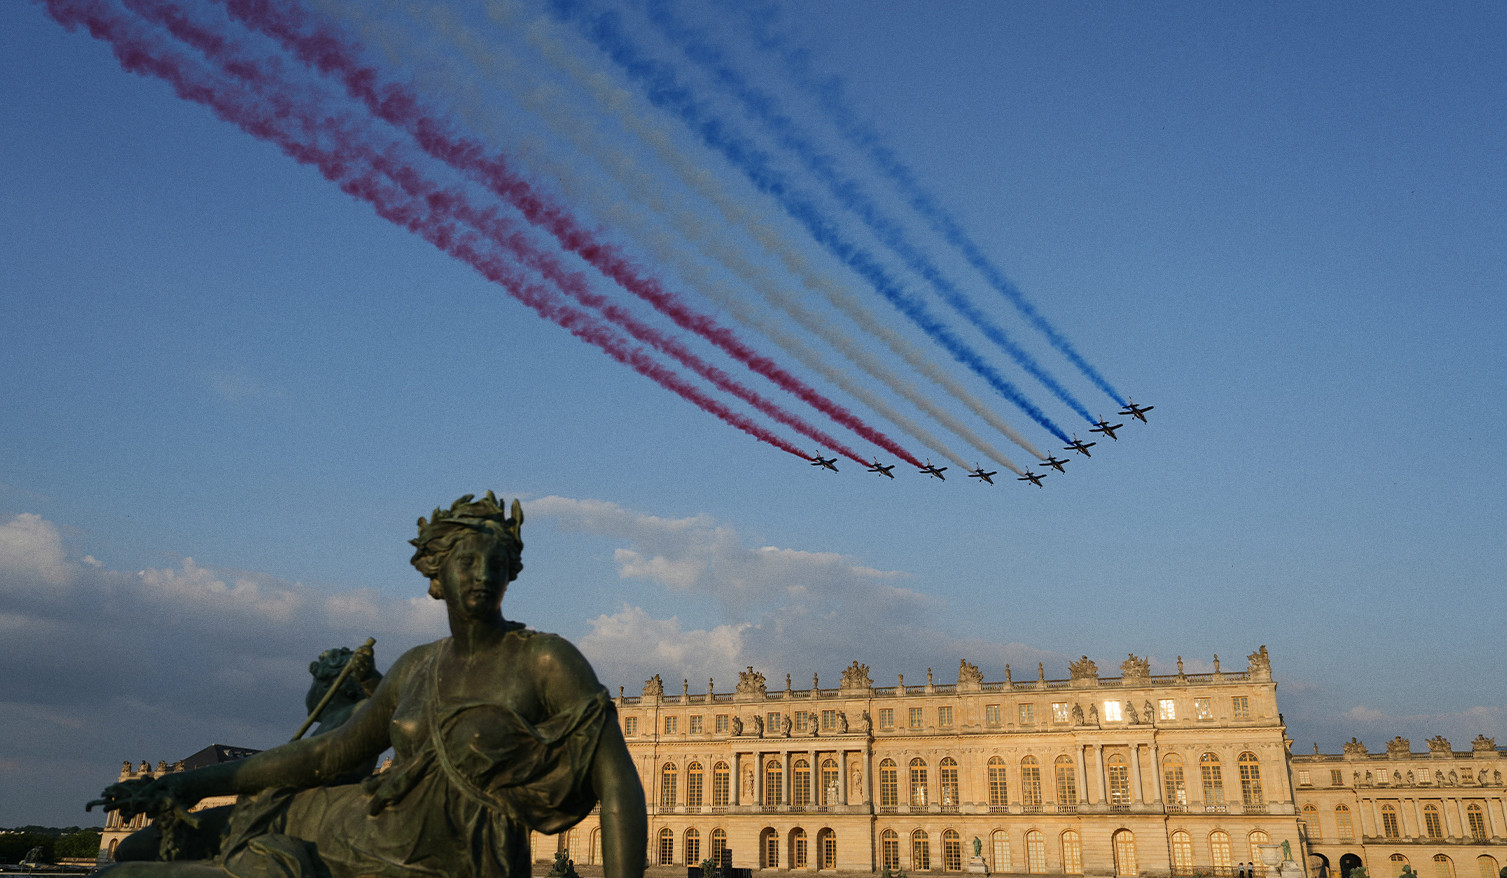 Jets fly over Versailles palace to mark 90th anniversary of French airforce